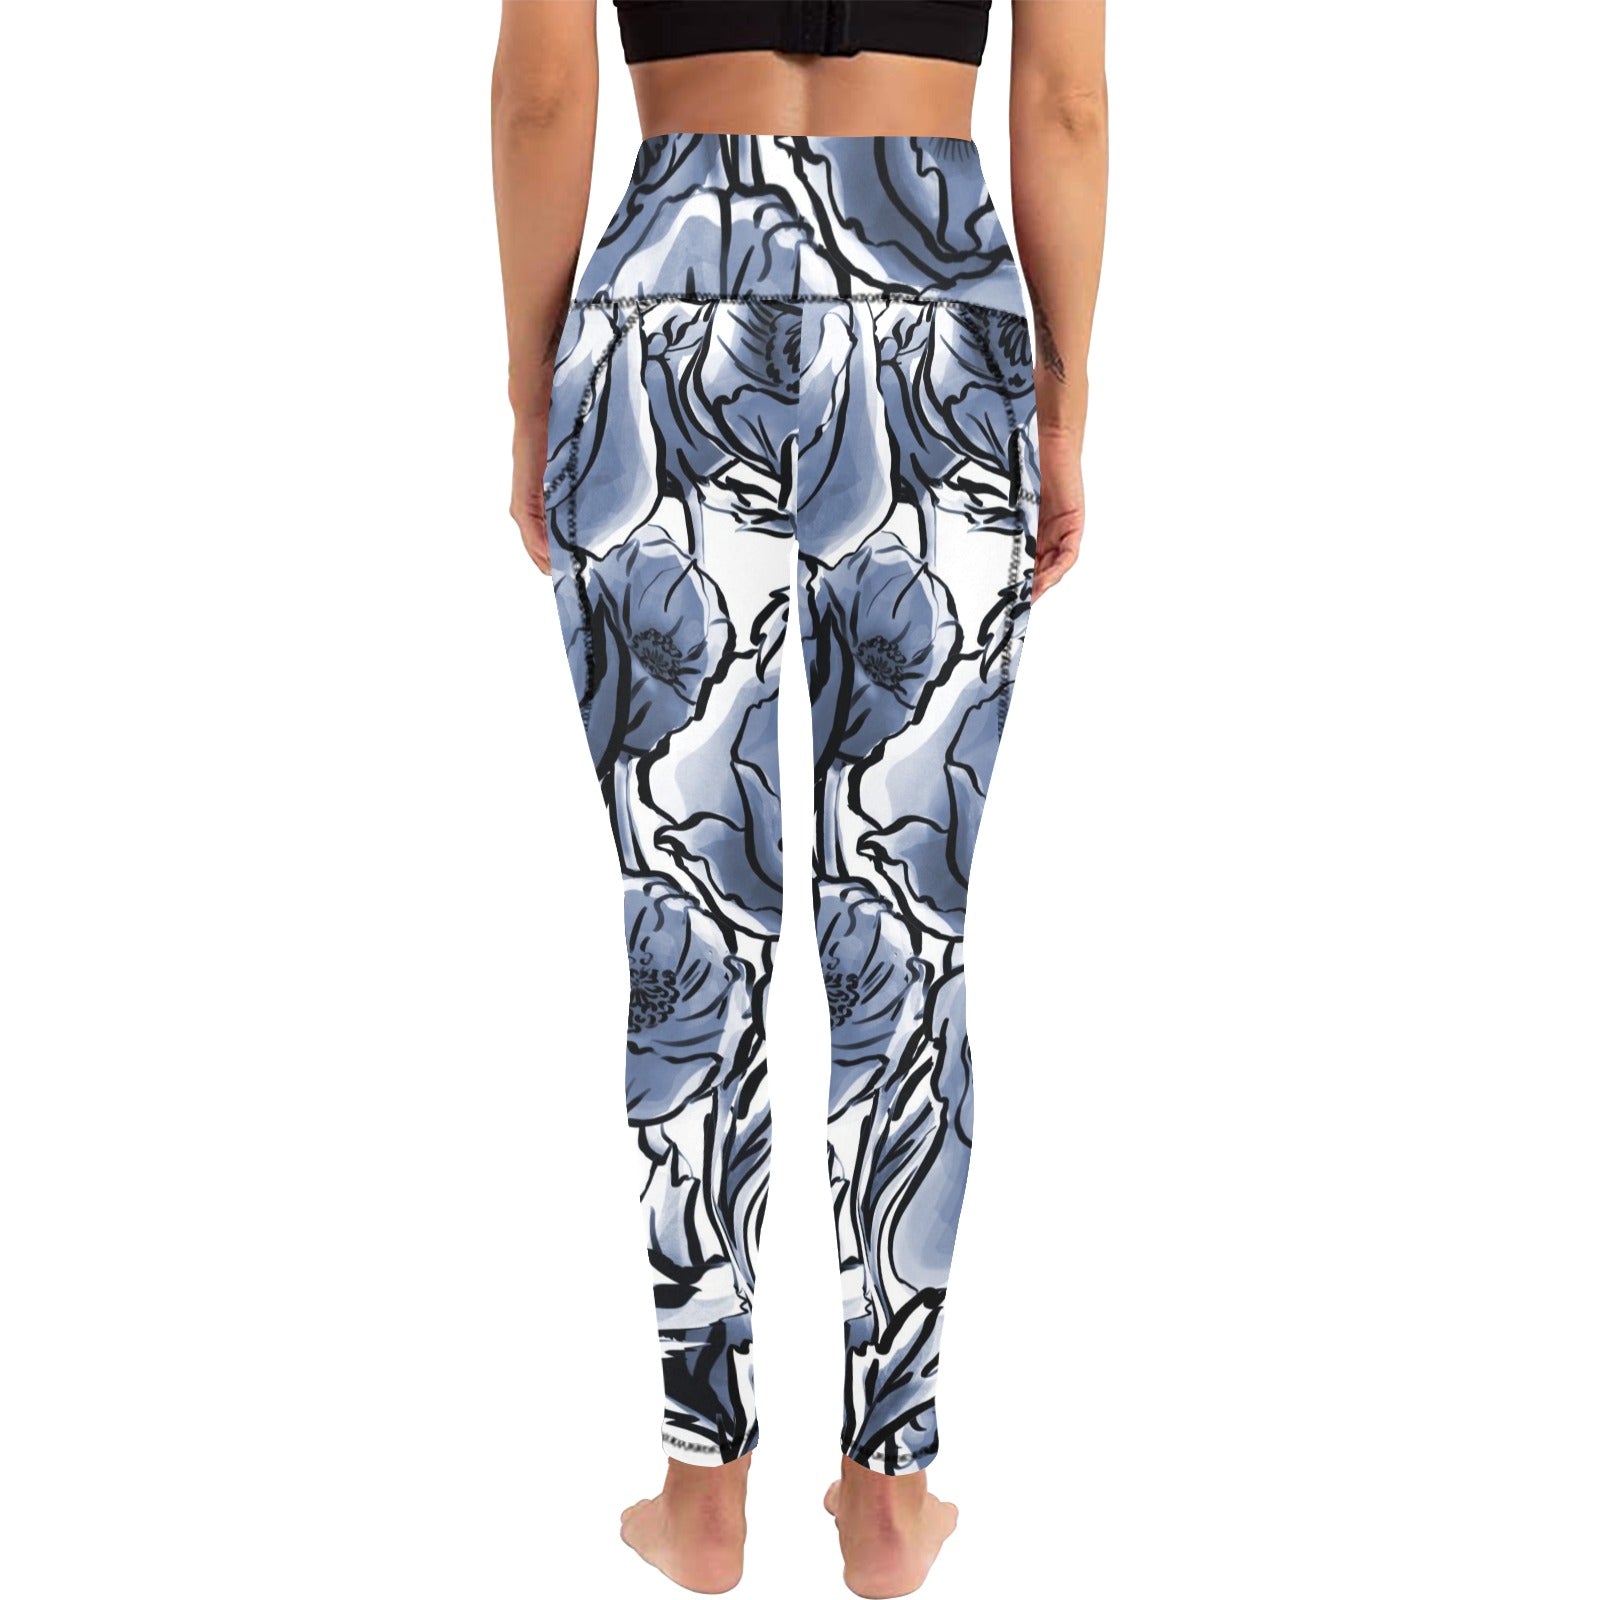 Blue And White Floral - Women's Leggings with Pockets Women's Leggings with Pockets S - 2XL Plants